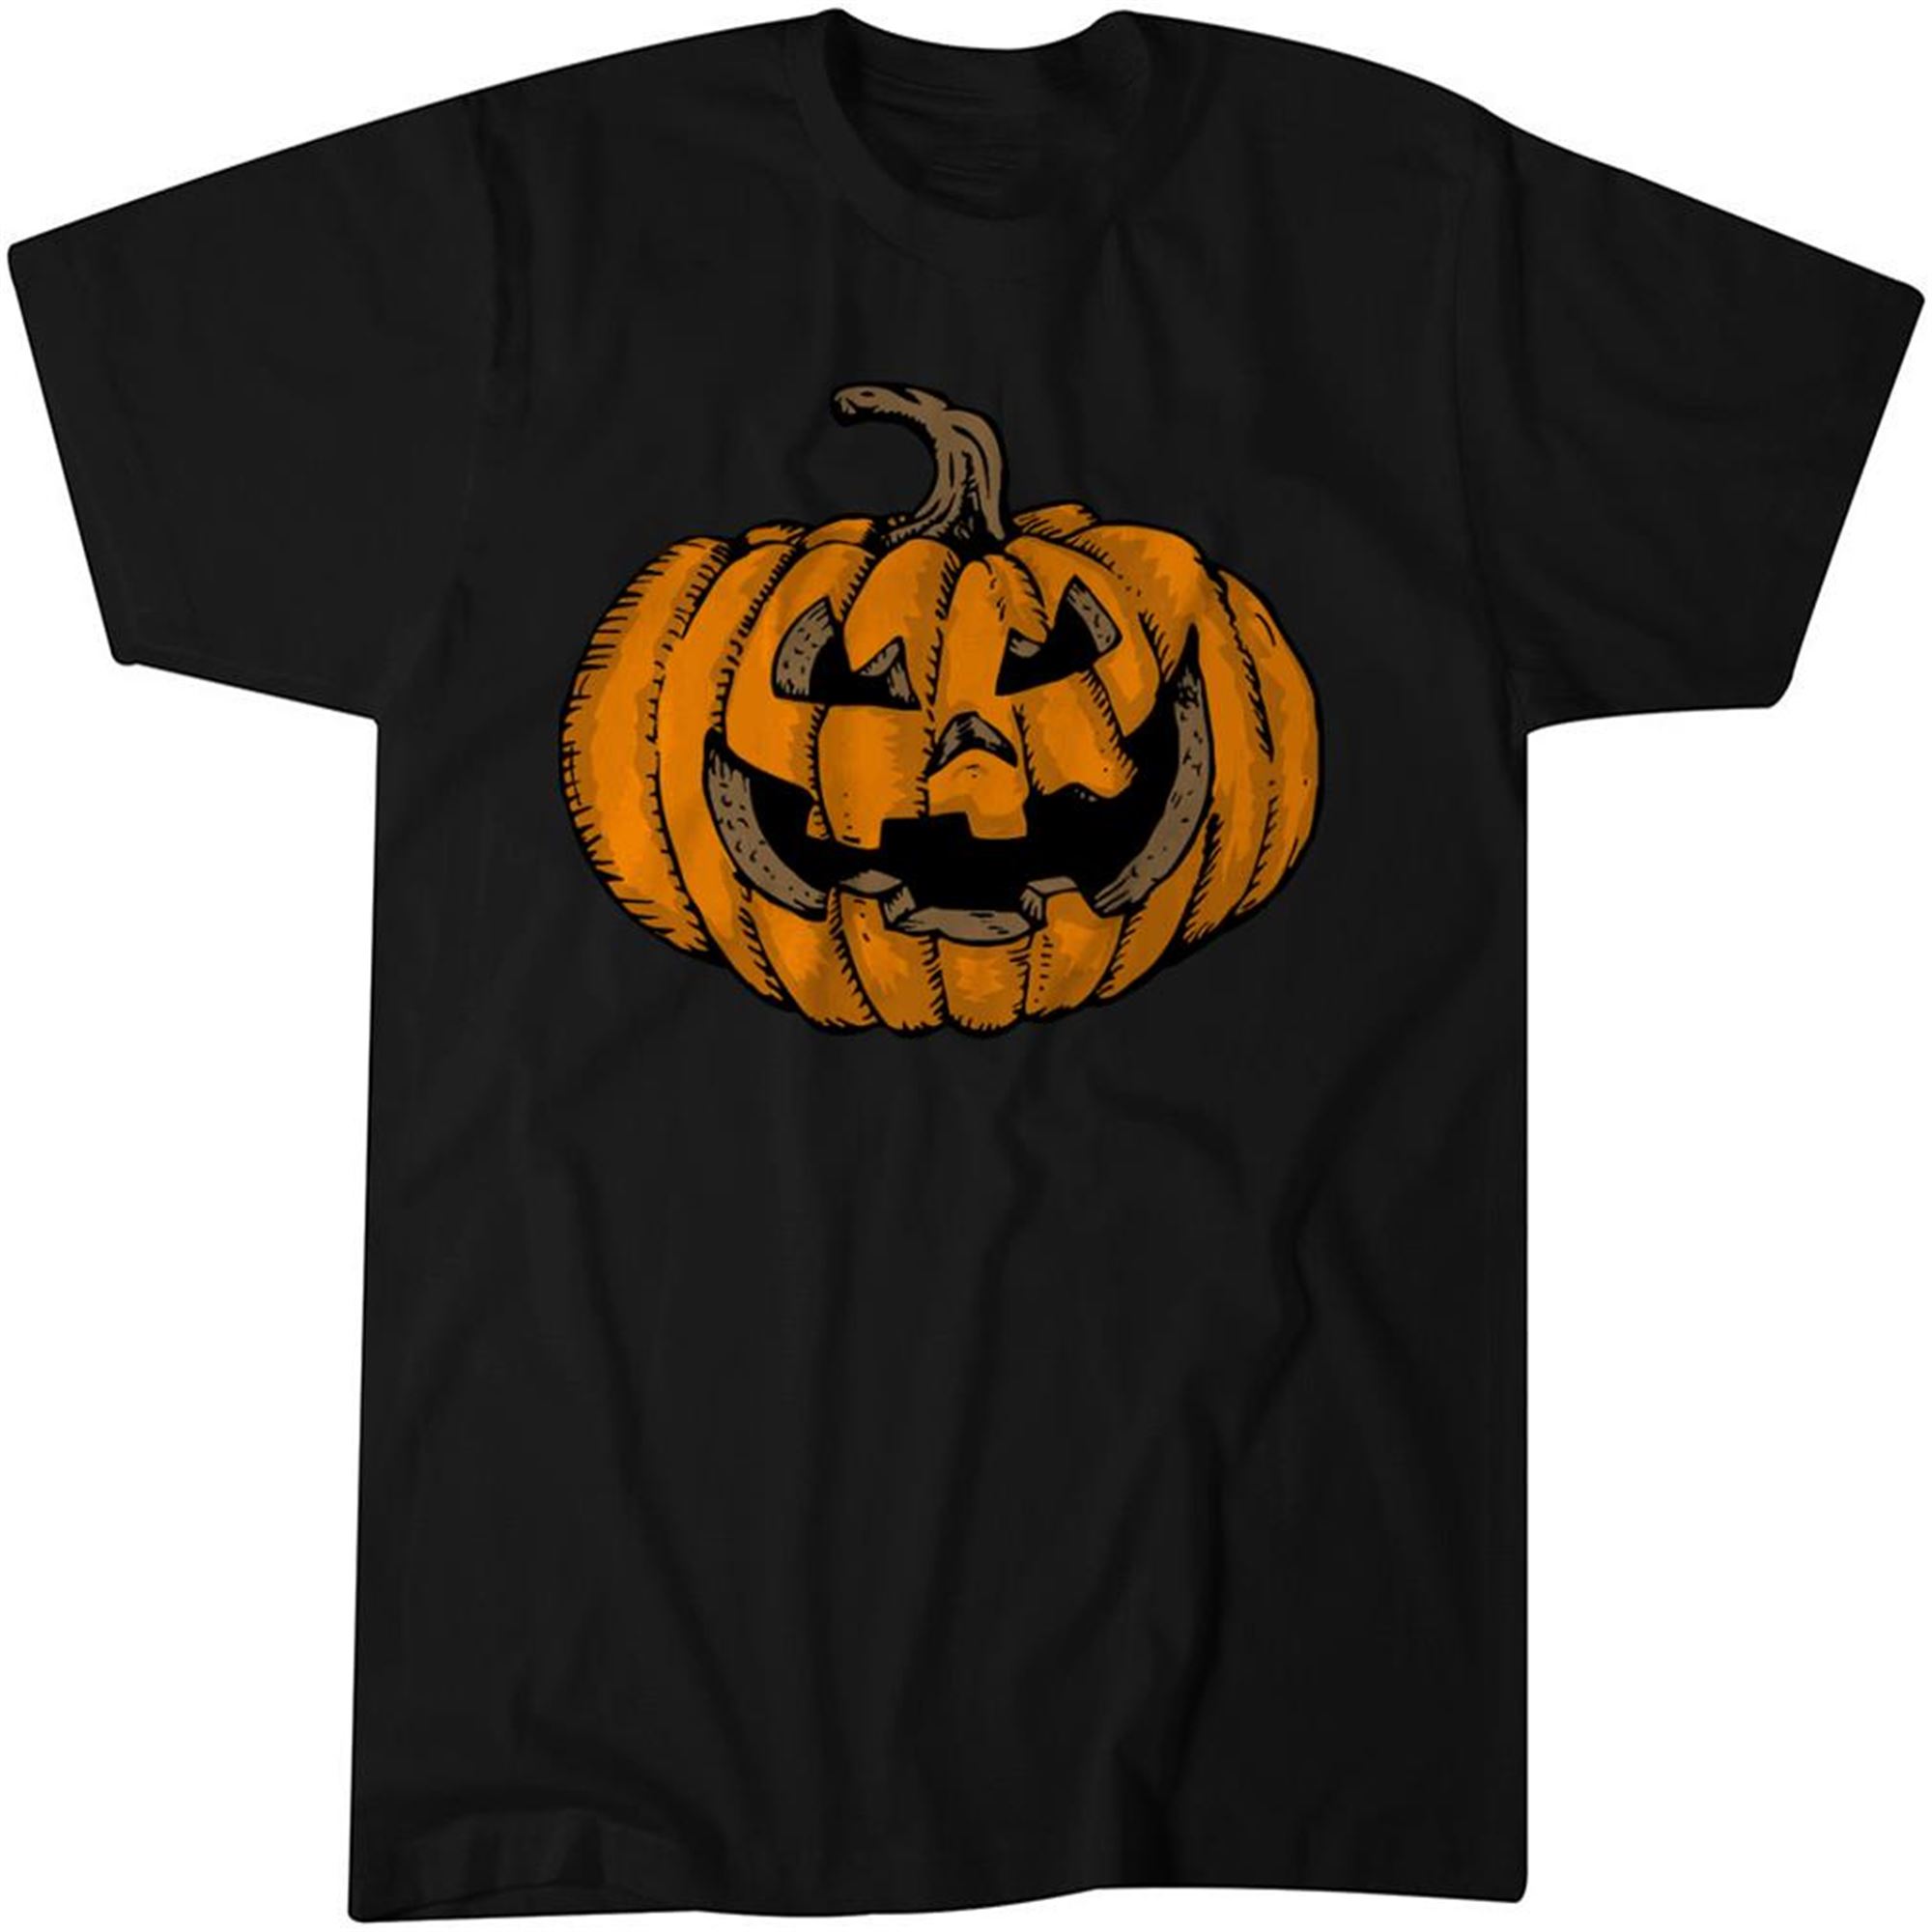 Jack Oh Lantern Essential T-shirt Plus Size Up To 5xl